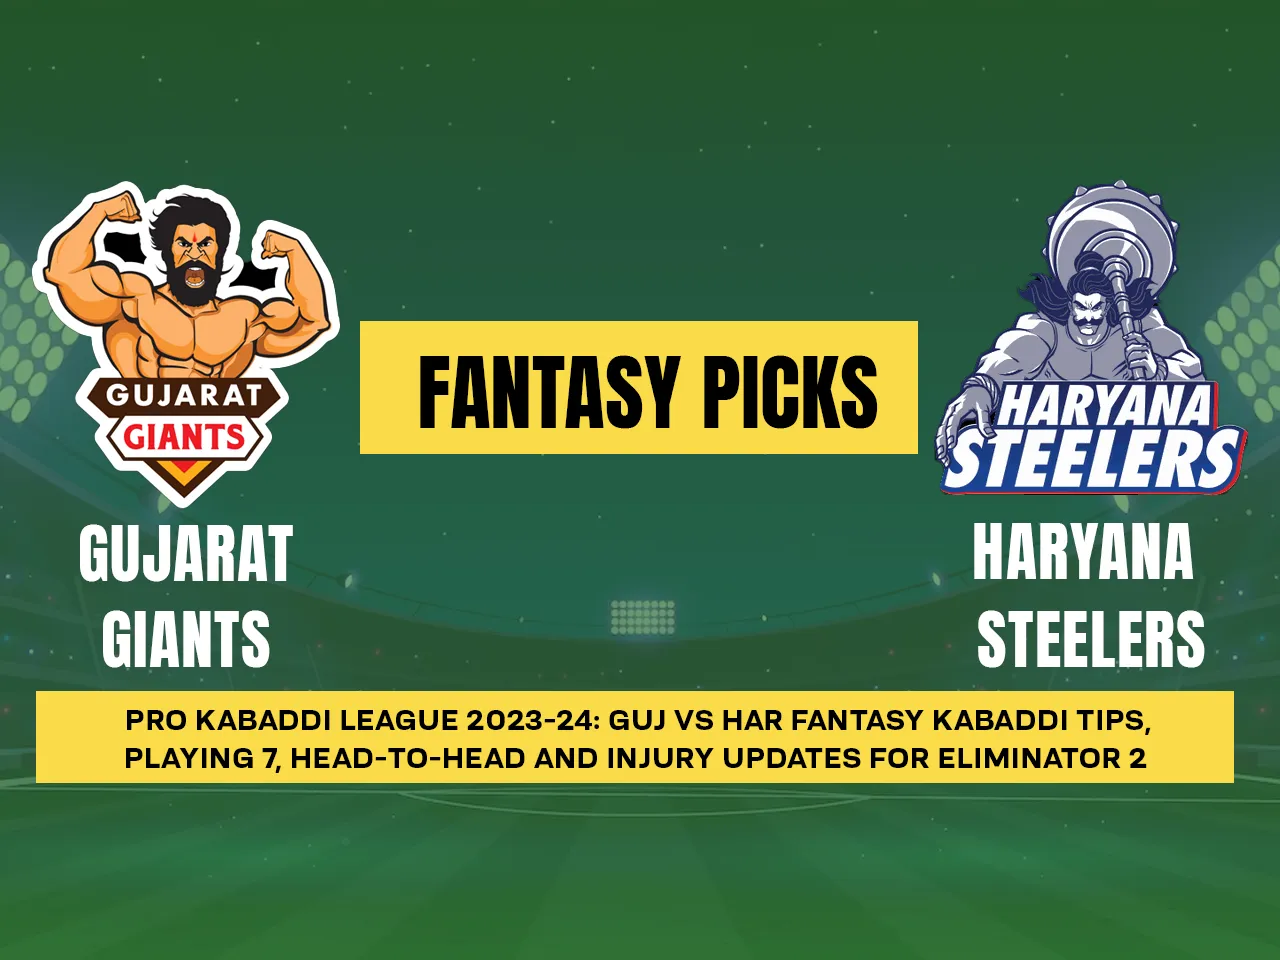 PKL 2023-24: GUJ vs HAR Dream11 Prediction for Match 132 Playing 7 PKL Fantasy Tips Today Dream11 Team and More updates